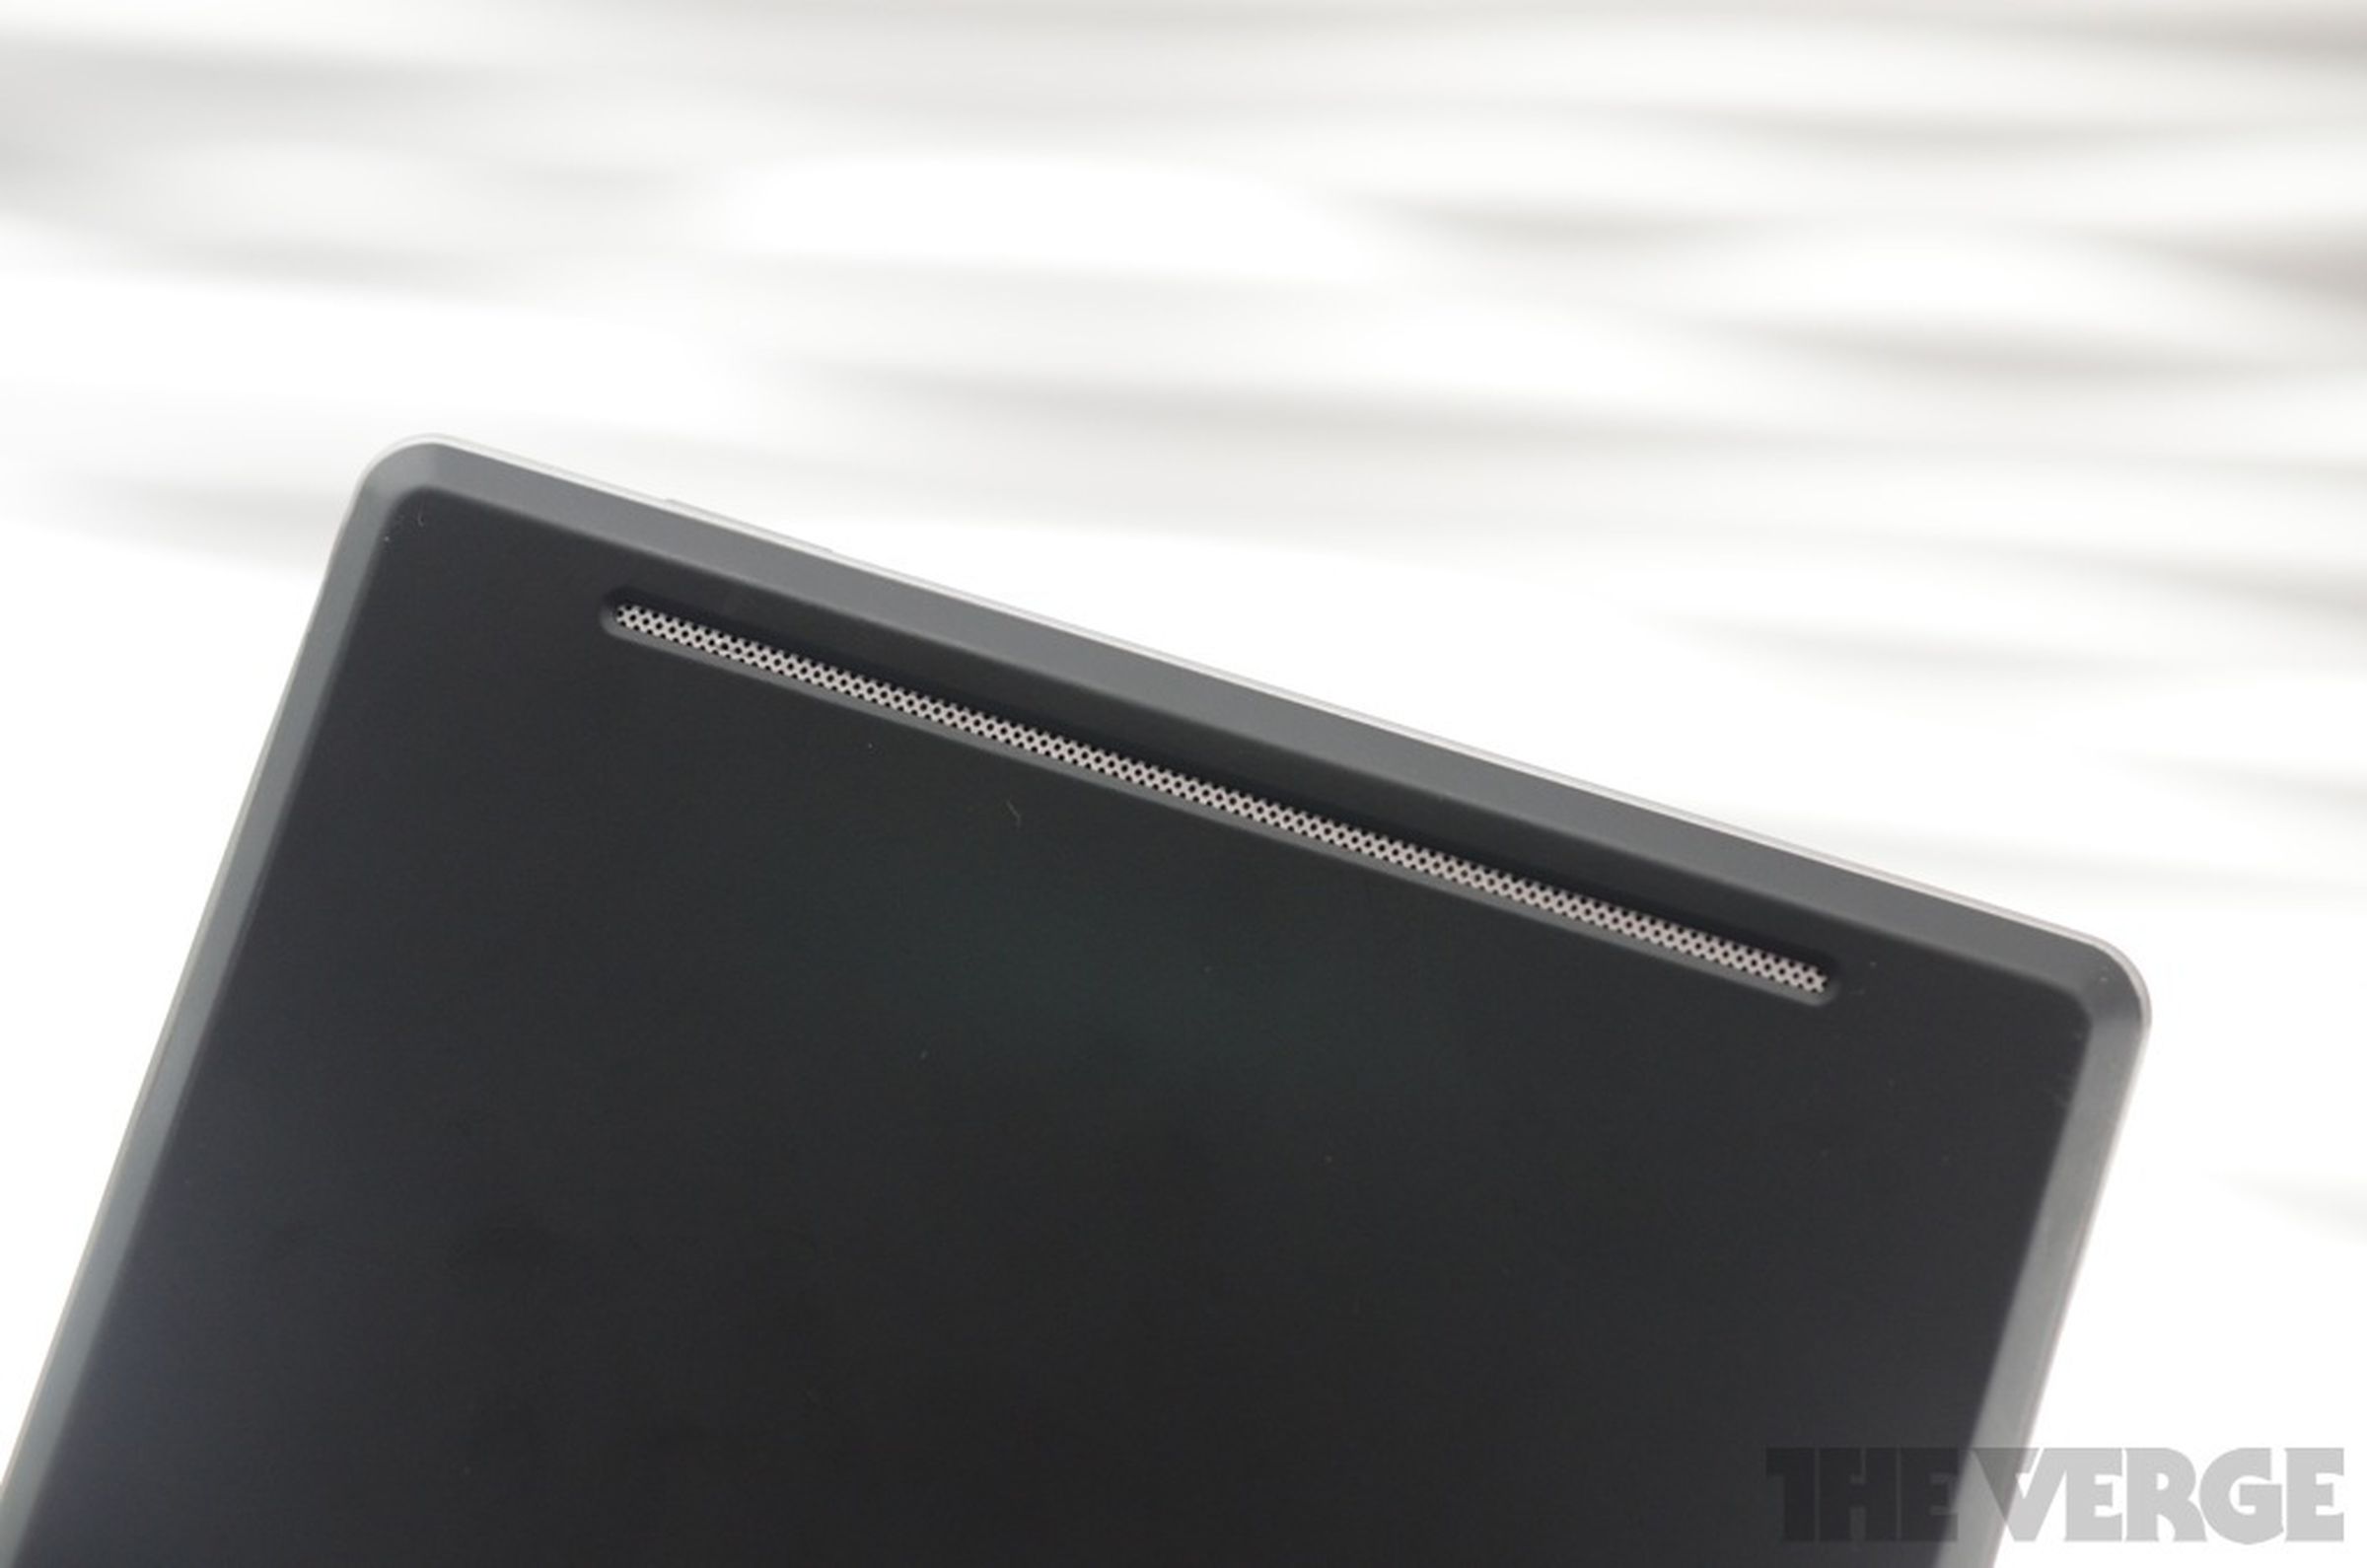 Vizio 7-inch Tablet hands-on pictures